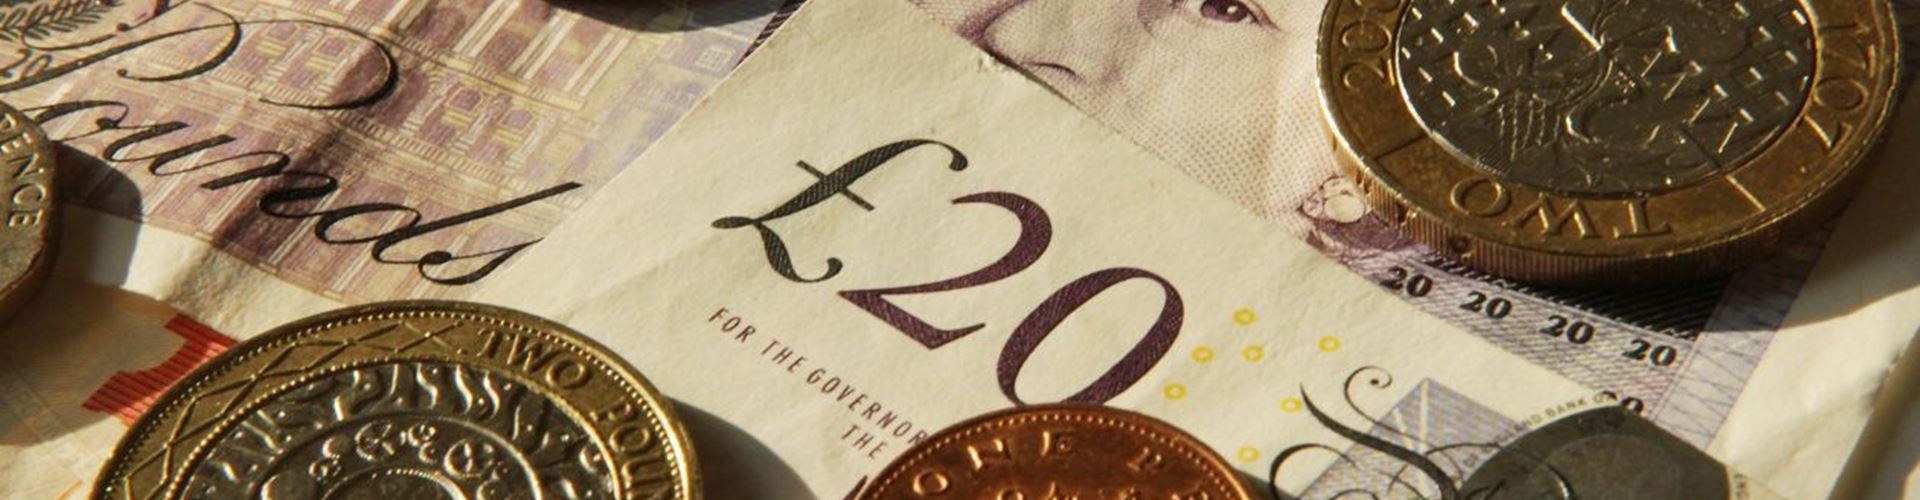 Business leaders call for UK minimum wage rise